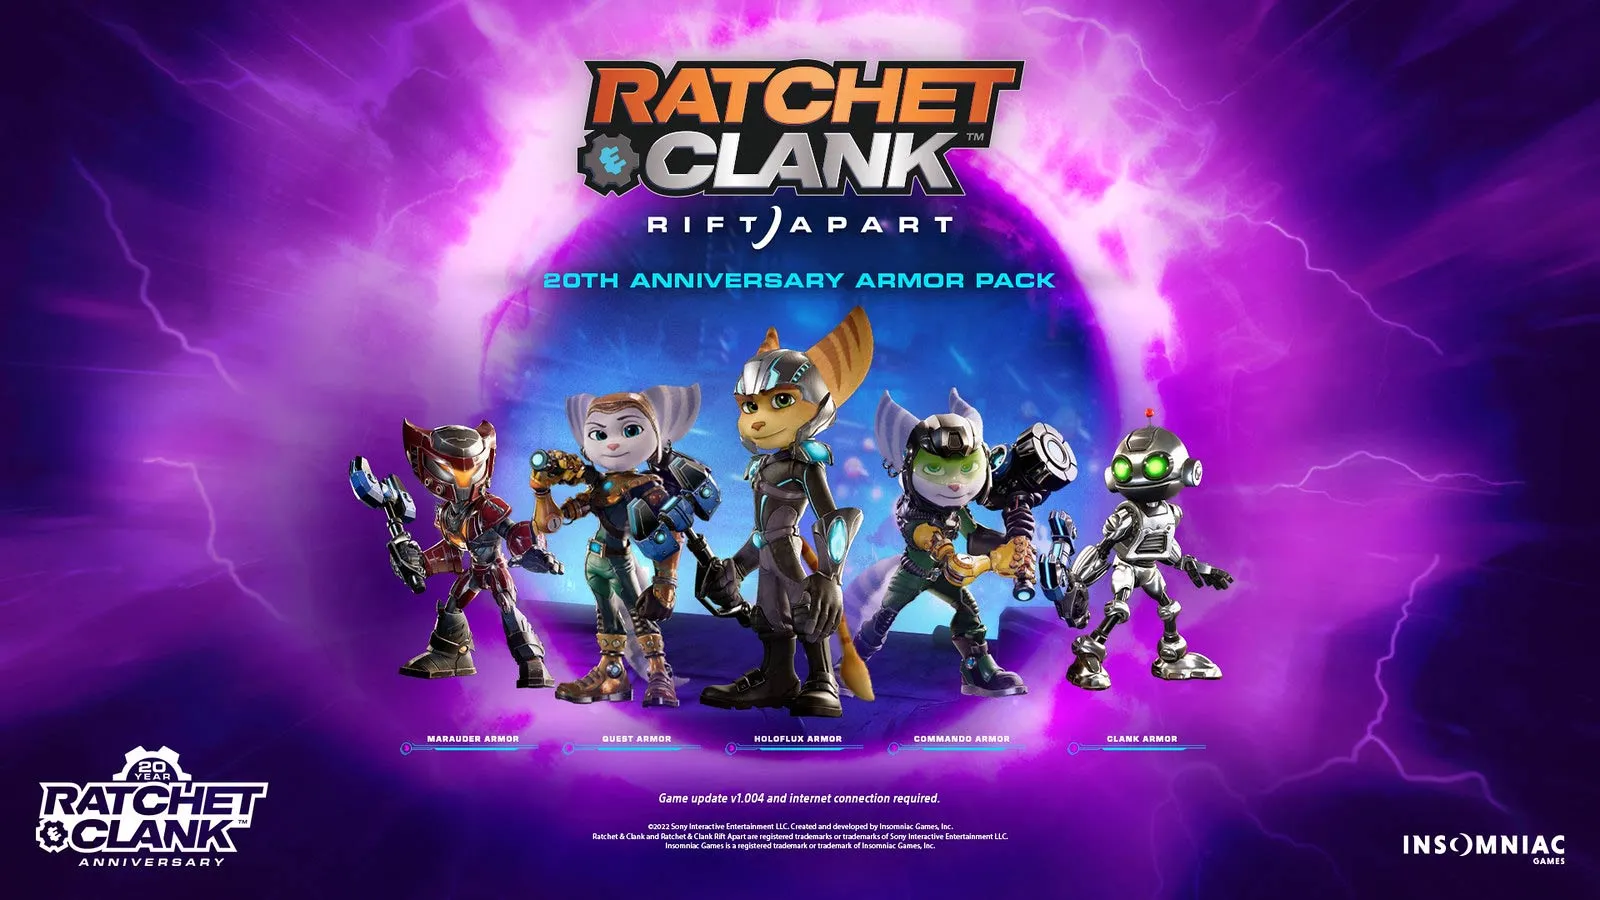 Ratchet & Clank 20th Anniversary celebrated with free DLC and classic games on PS Plus